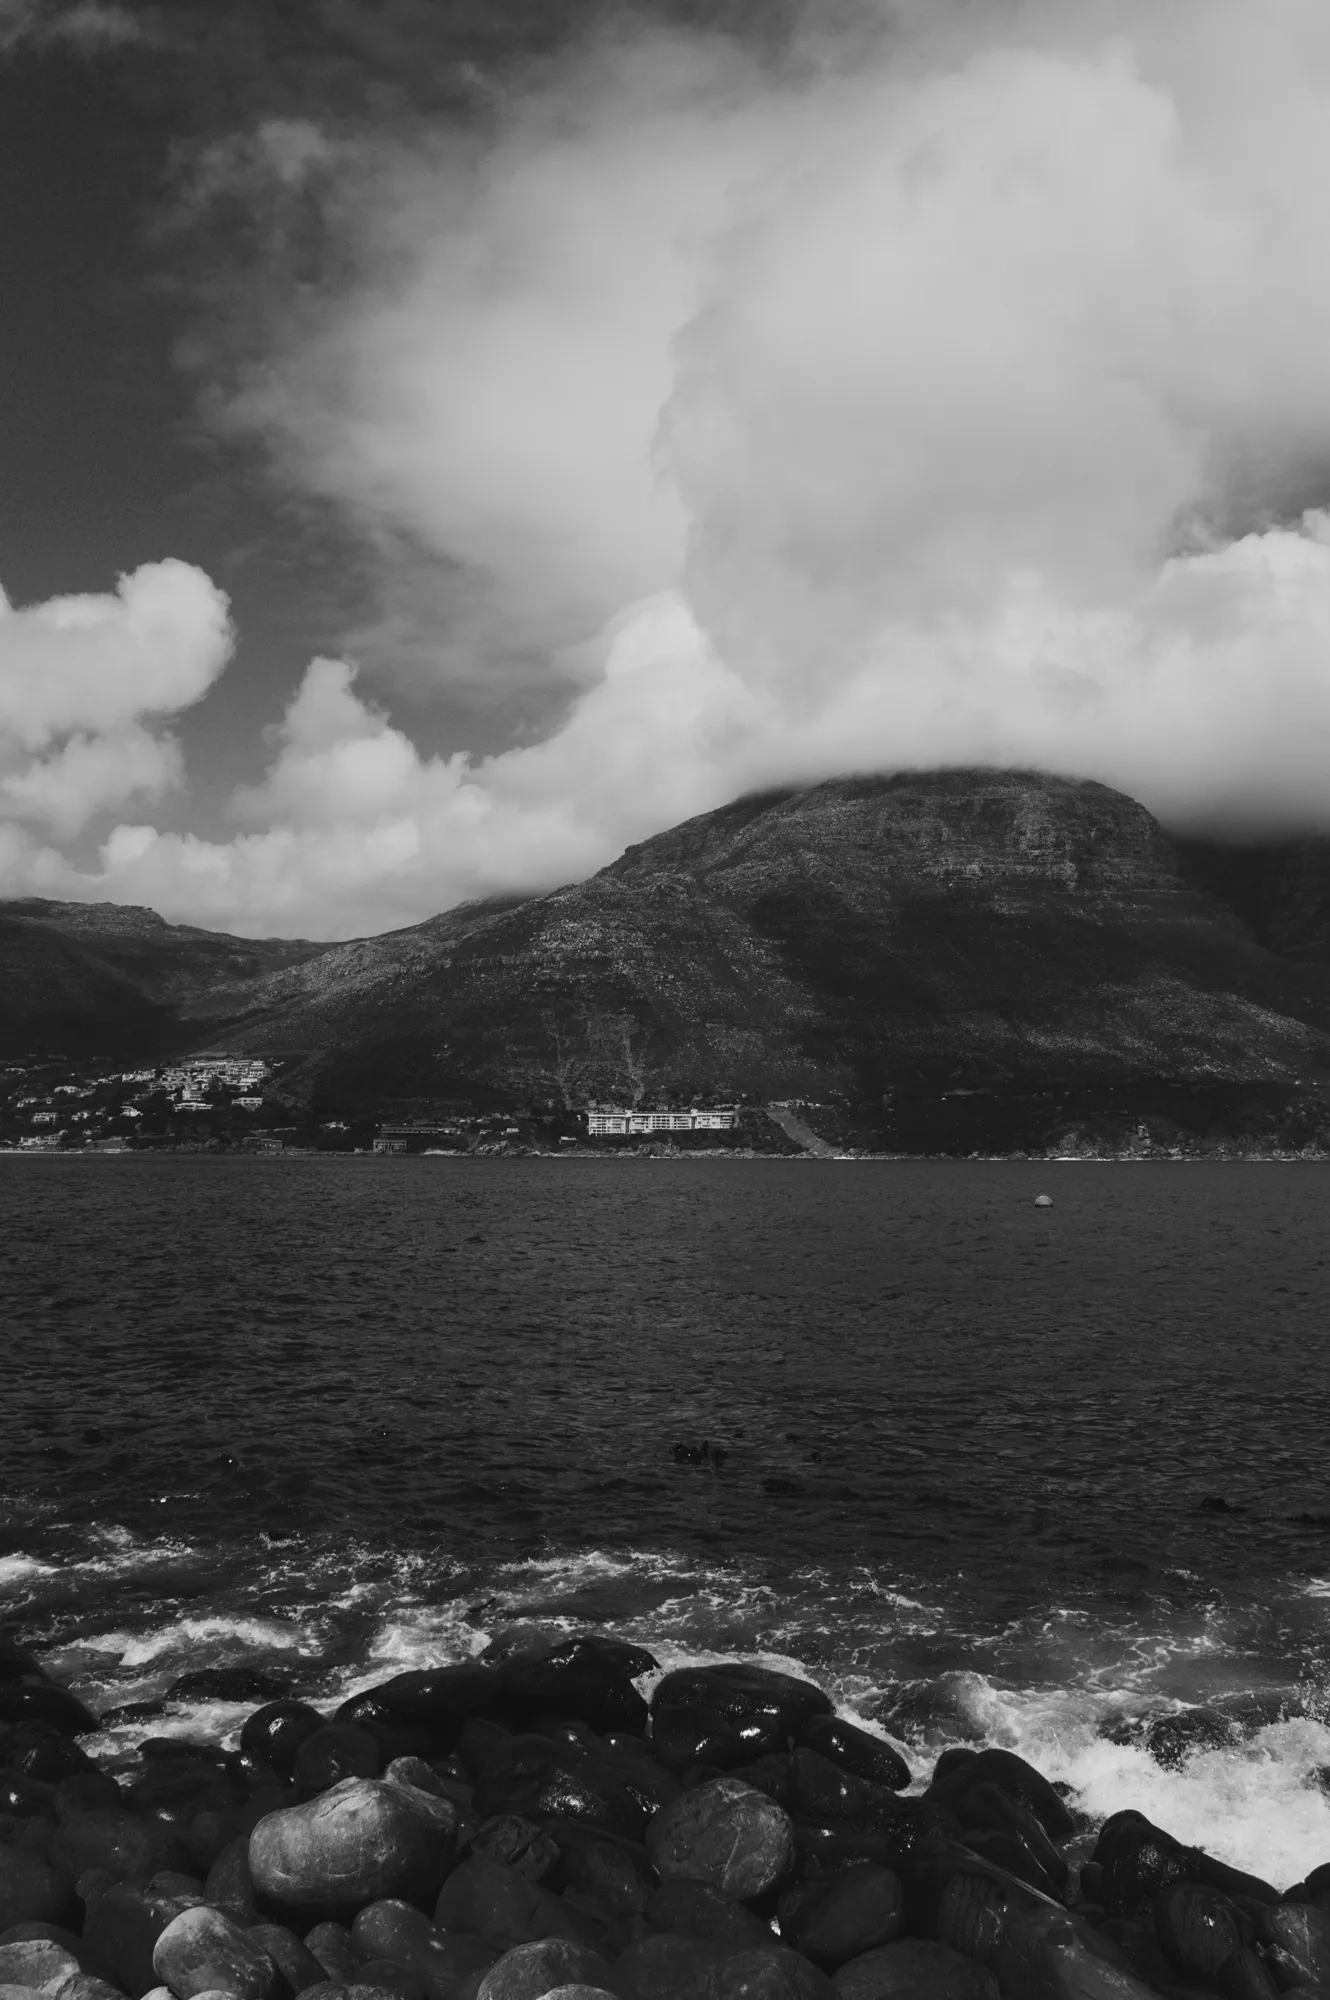 2019-12-26 - Hout Bay - View of ocean and rocks from 'Fish on the Rocks'